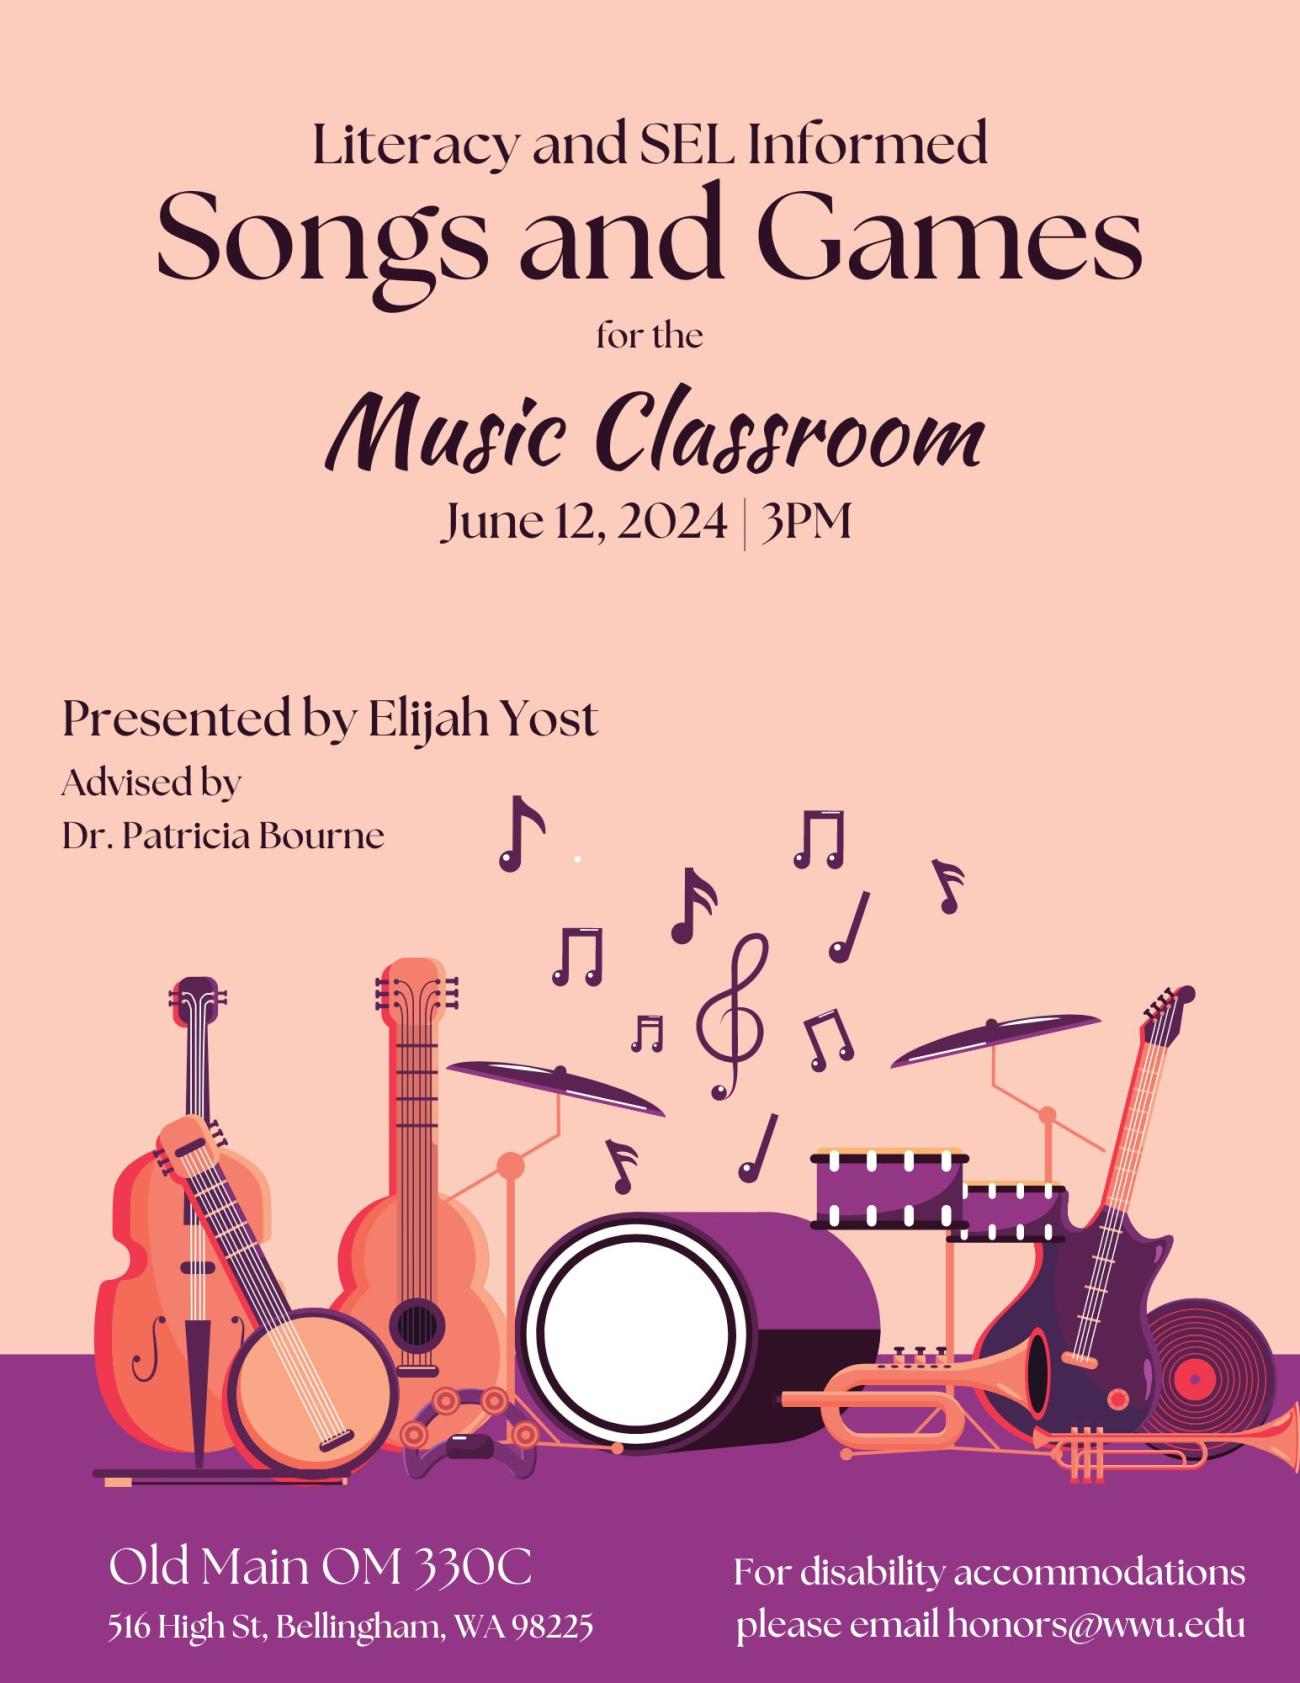 A pink and purple poster with a collection of cartoon instruments and music notes above them. The text reads "Literacy and SEL Informed Songs and Games for the Music Classroom. June 12, 2024. 3PM. Presented by Elijah Yost. Advised by Dr. Patricia Bourne. Old Main OM 330C. 516 High St, Bellingham, WA 98225. For disability accomodations please email honors@wwu.edu".